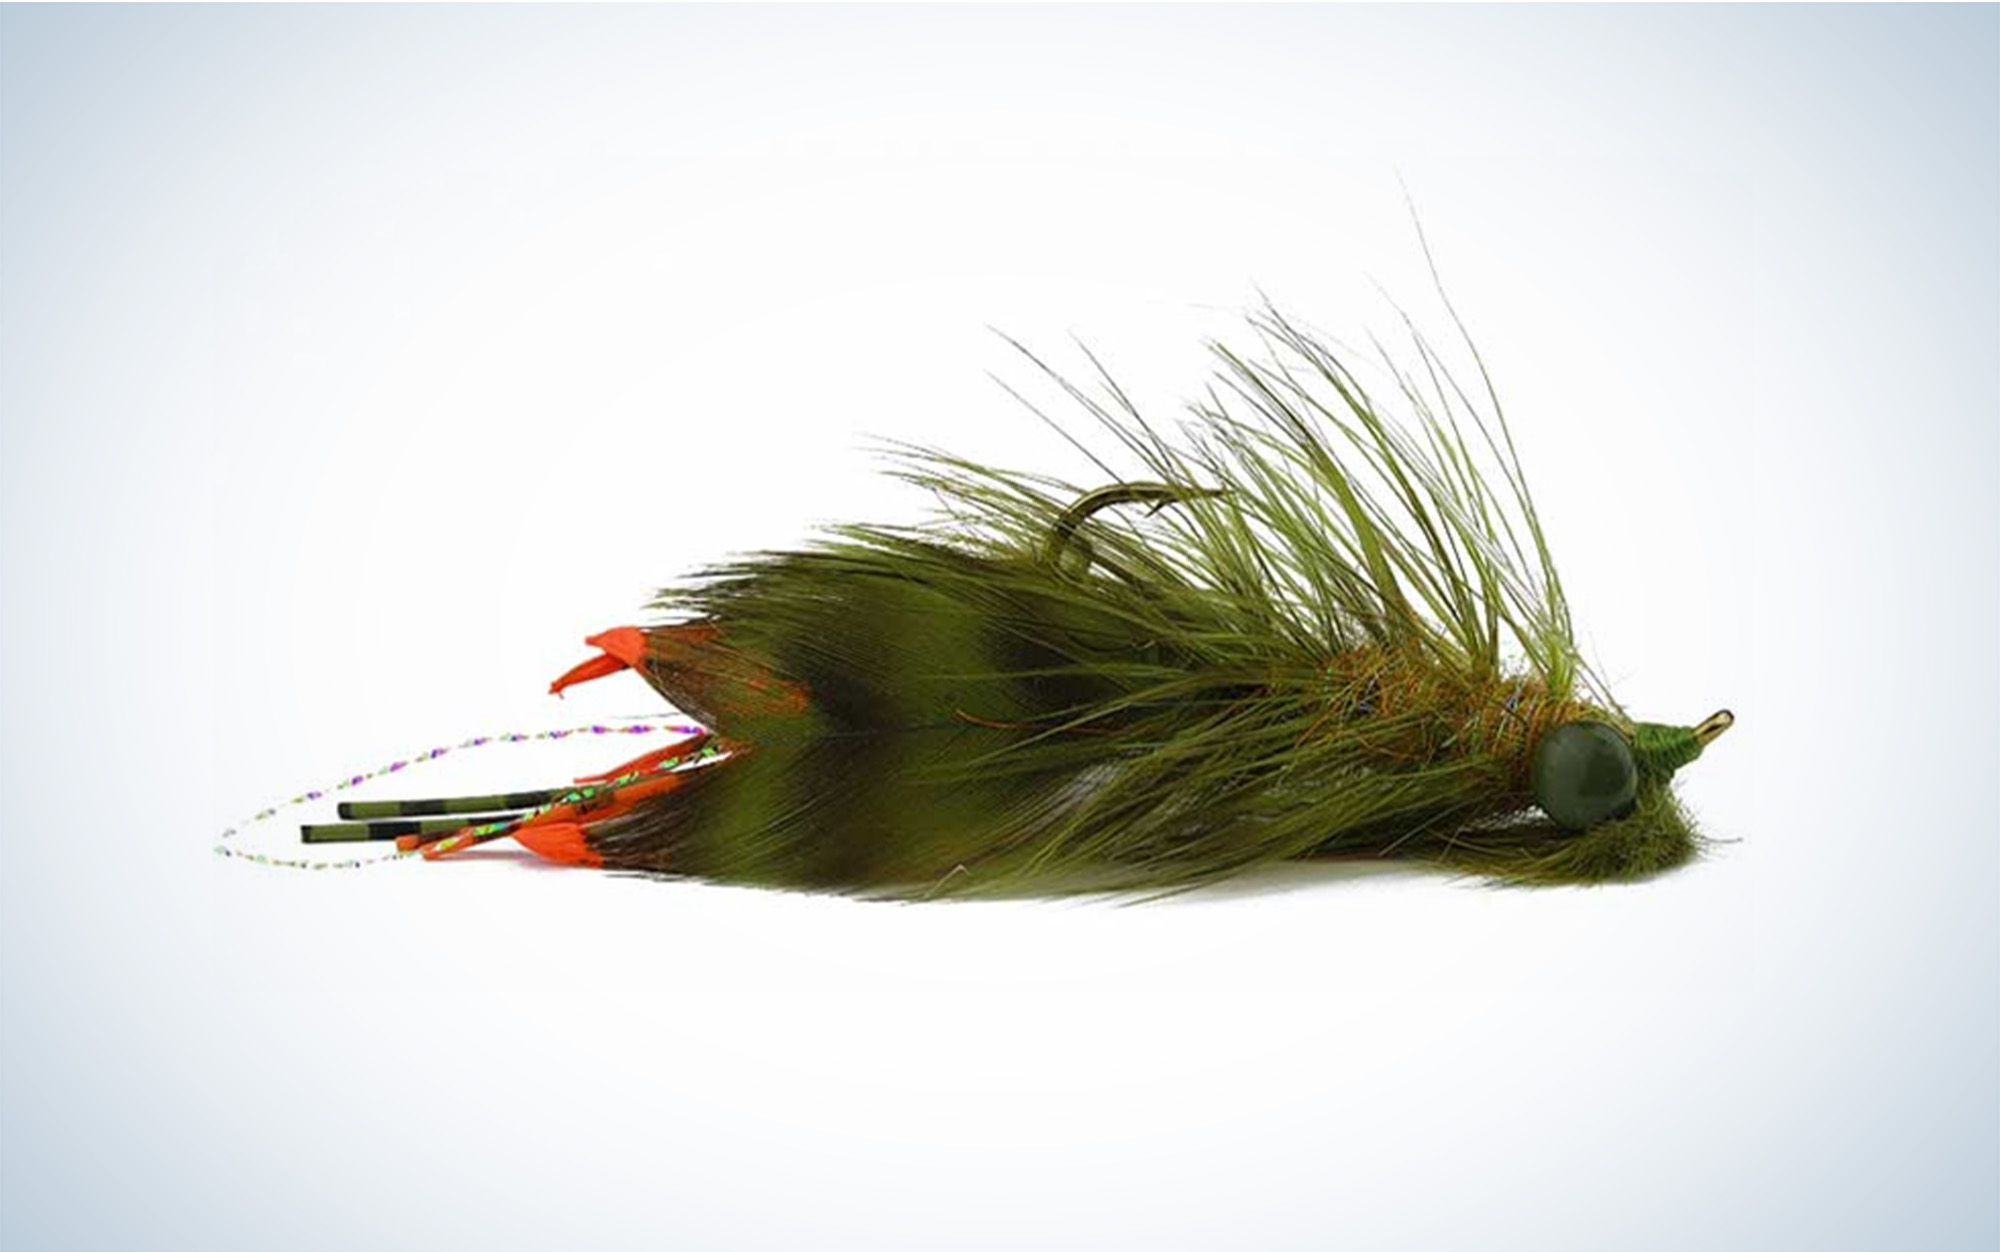 The Near-Nuff Crayfish is one of the best bass flies.